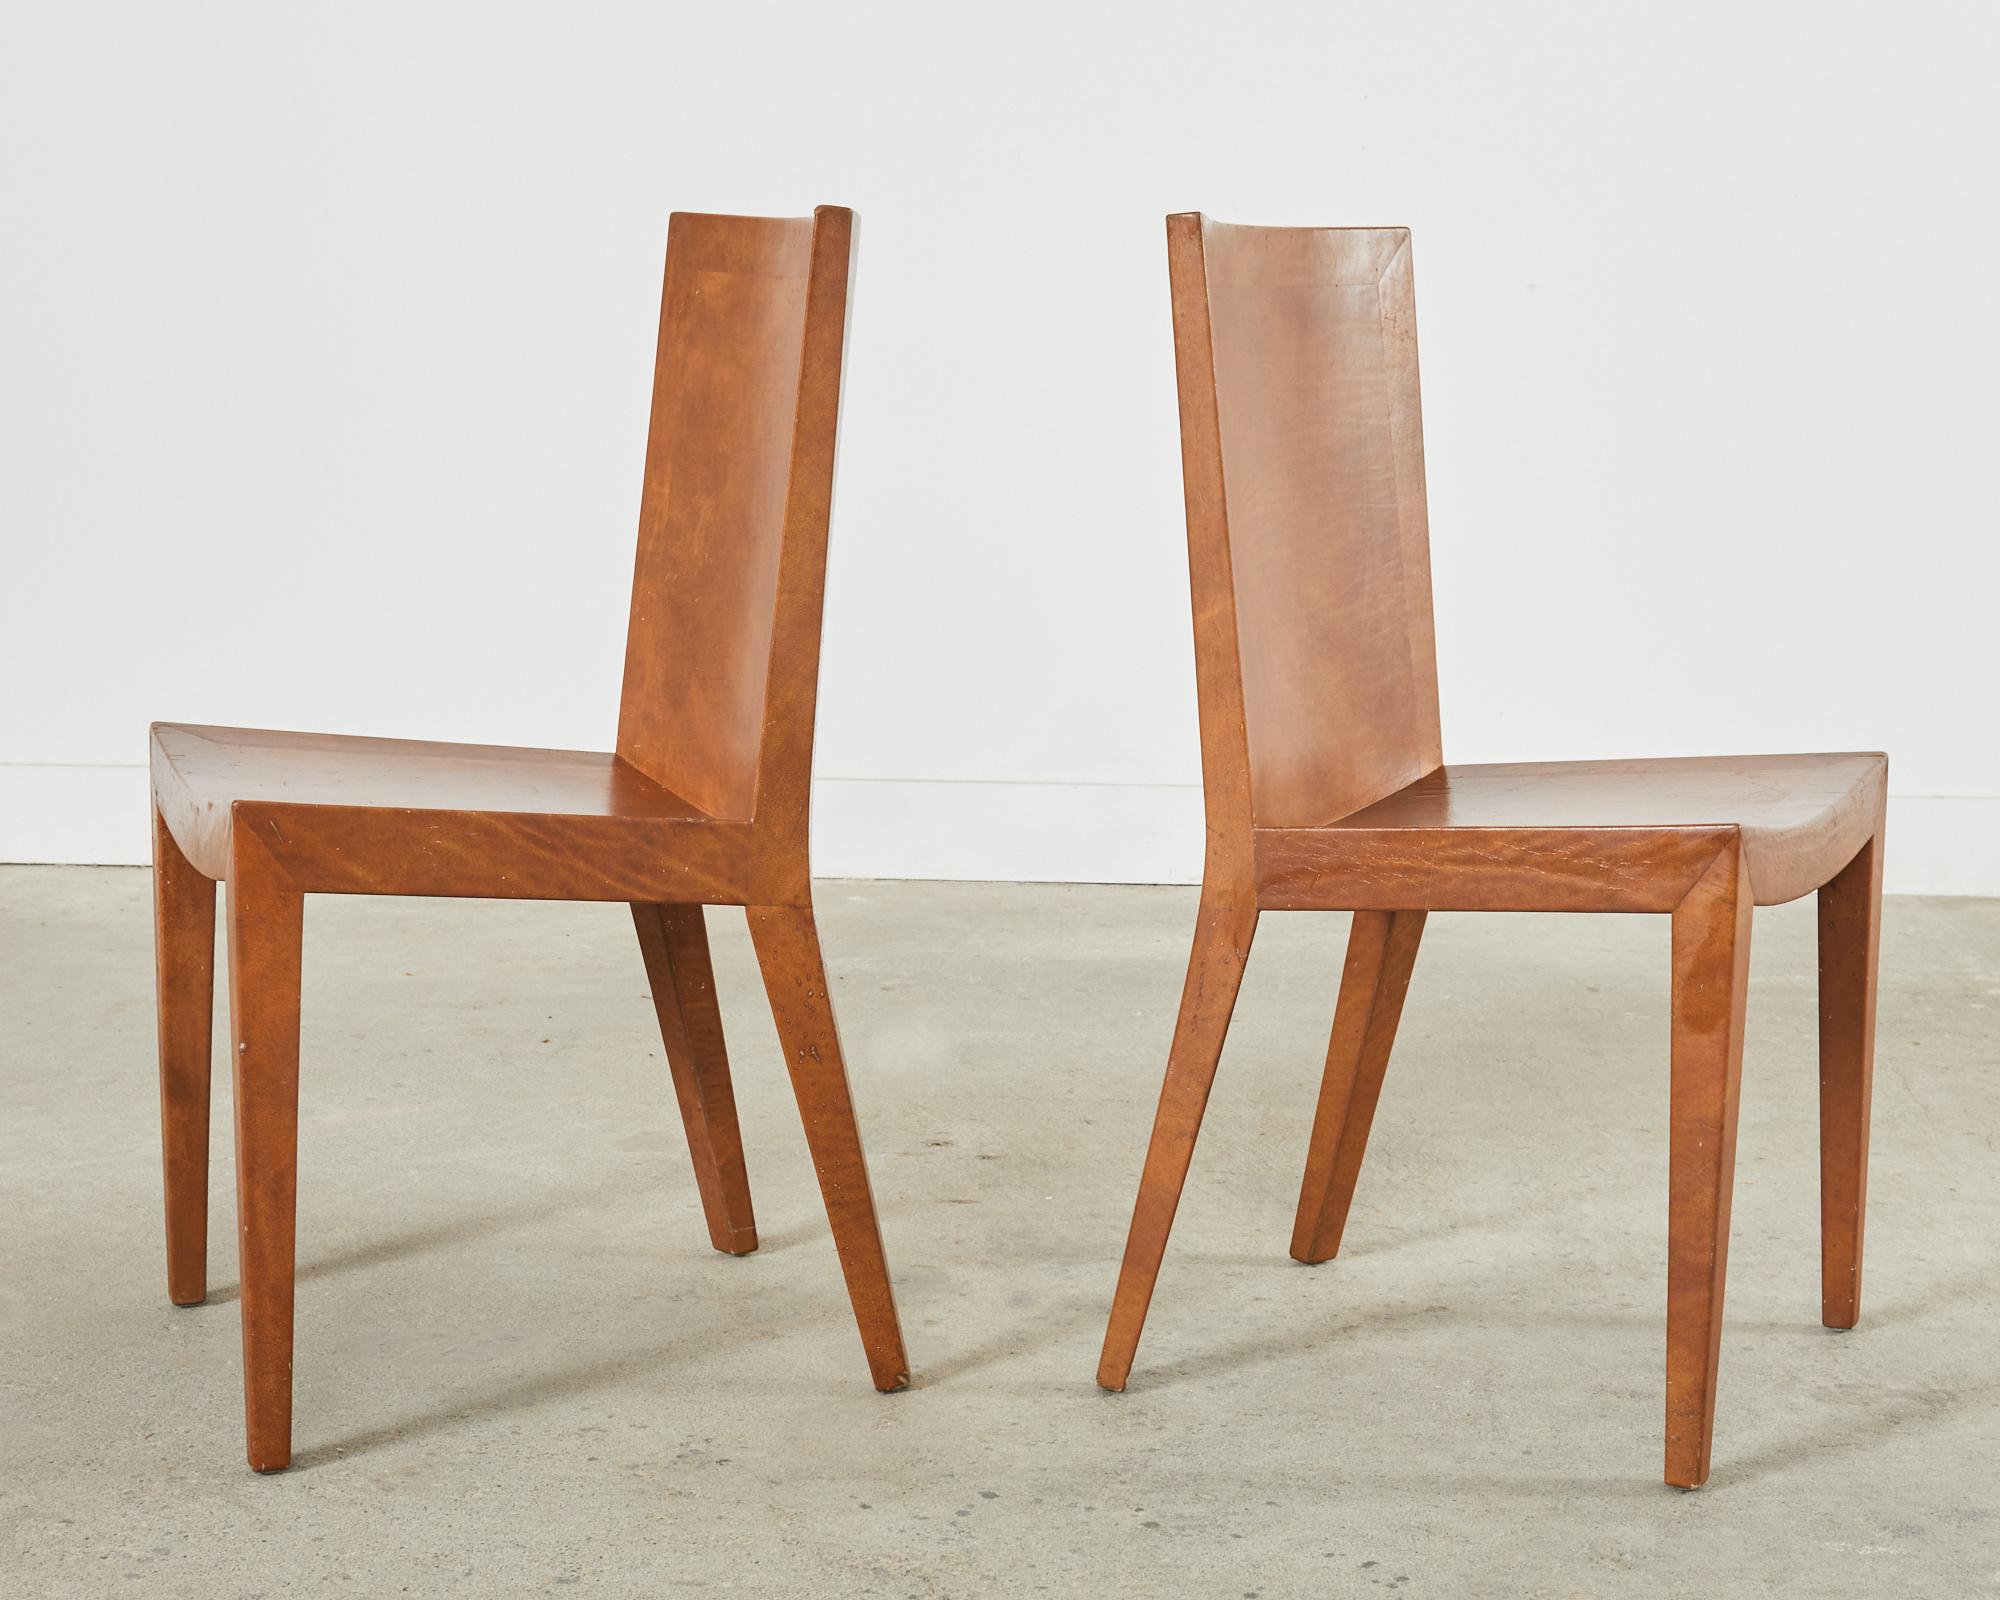 Hand-Crafted Pair of Signed Karl Springer Goatskin JMF Chairs, 1986 For Sale